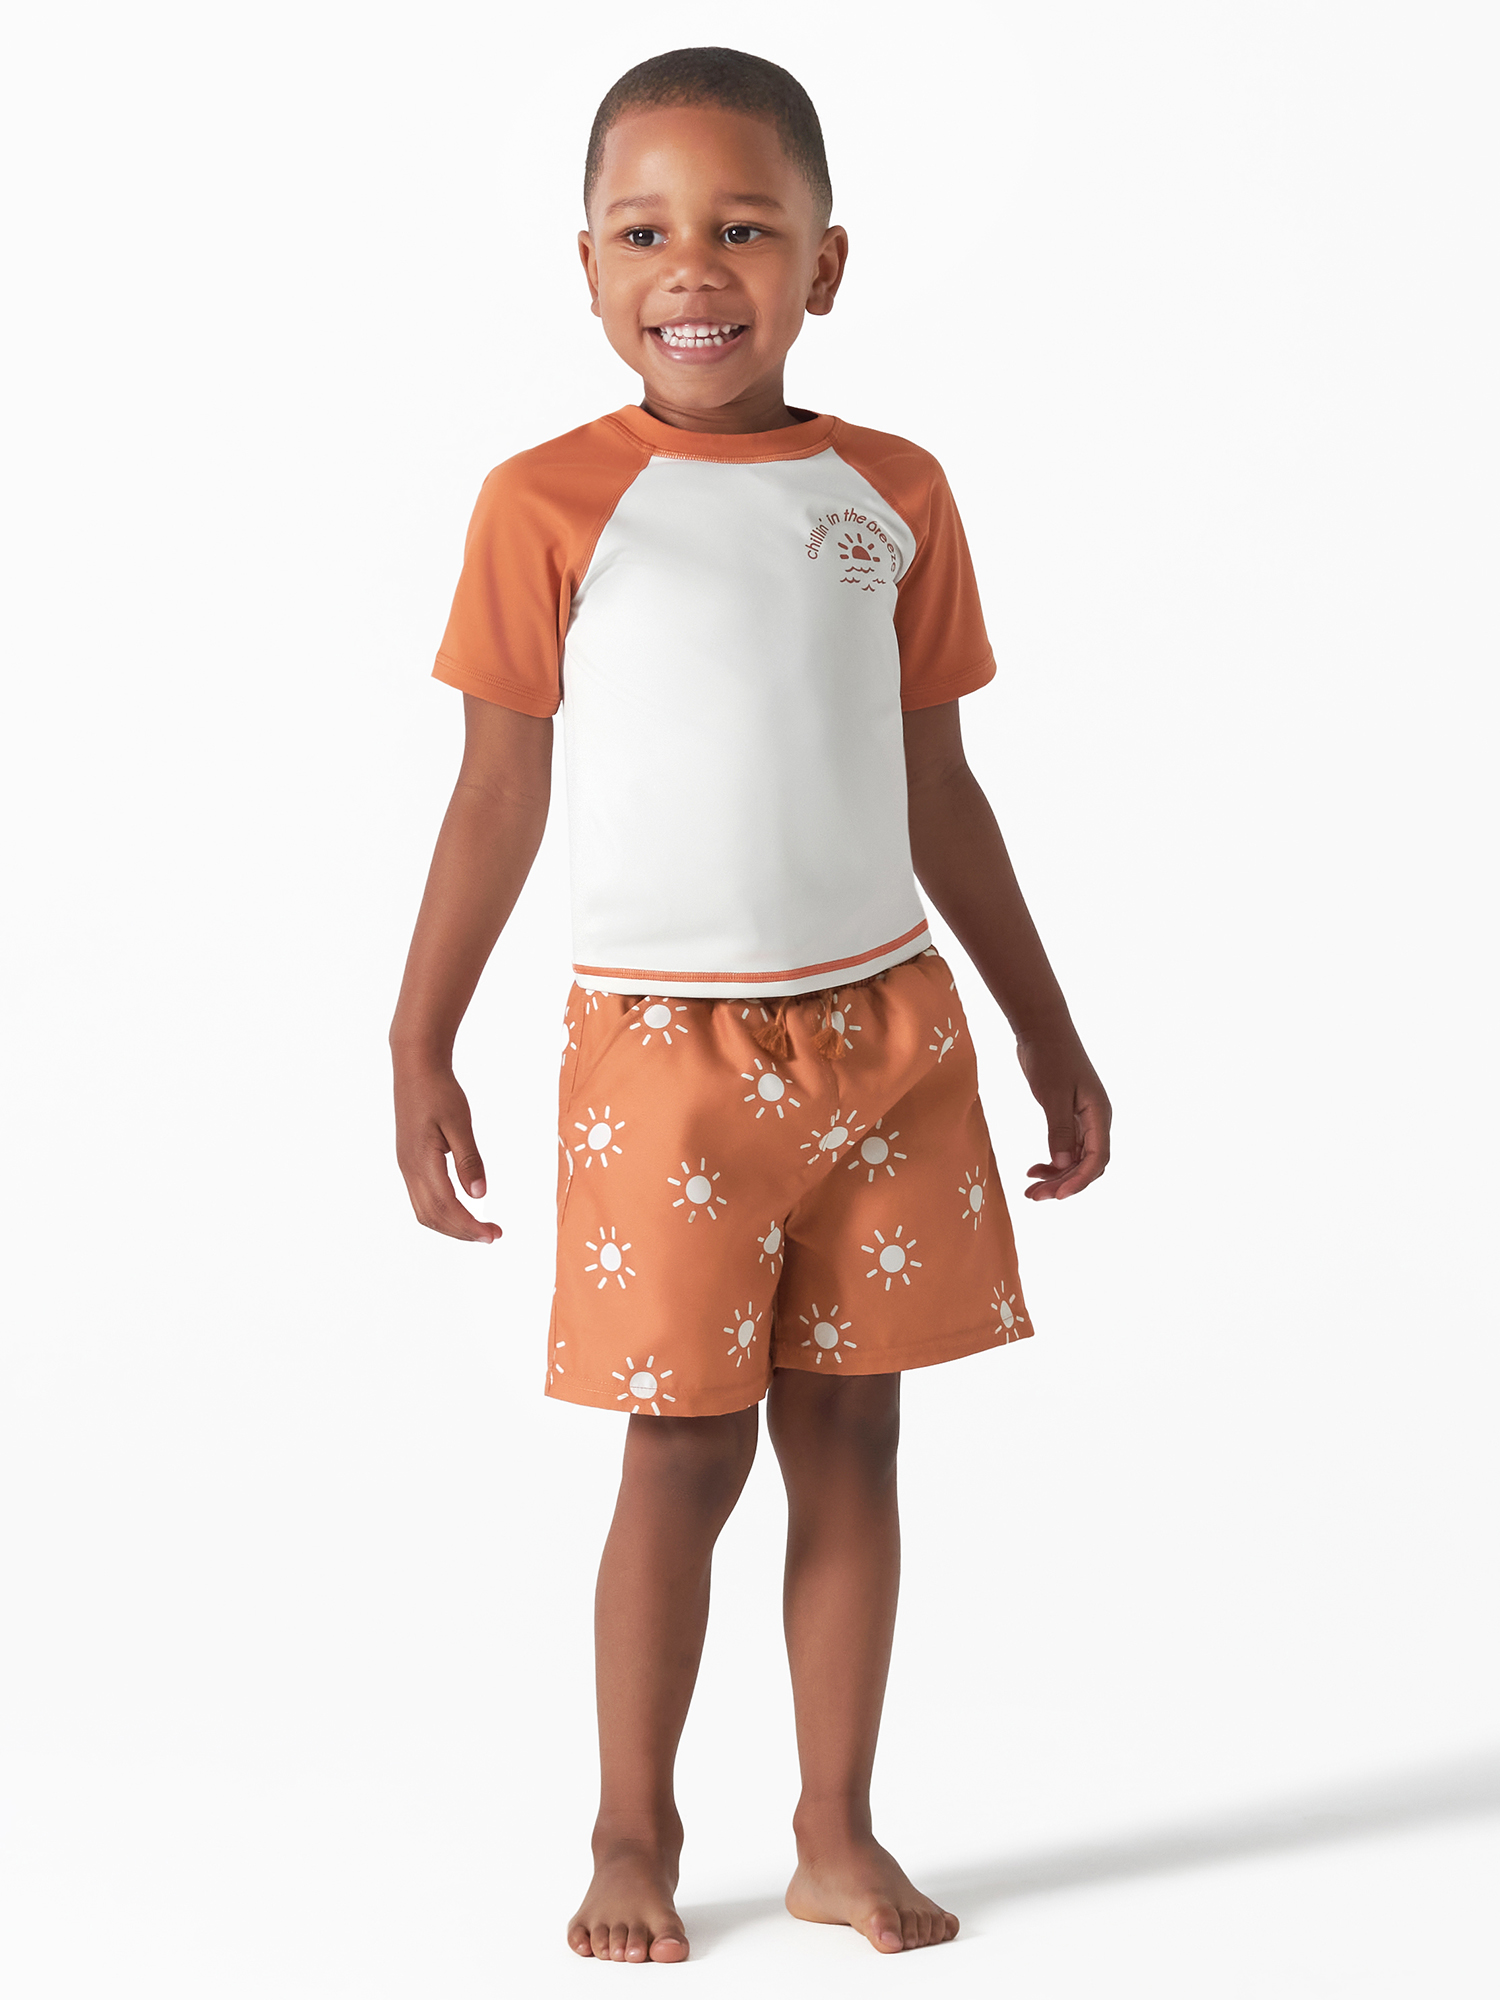 Modern Moments By Gerber Baby and Toddler Boy Rashguard and Swim Trunks Set, 12M-5T - image 1 of 12